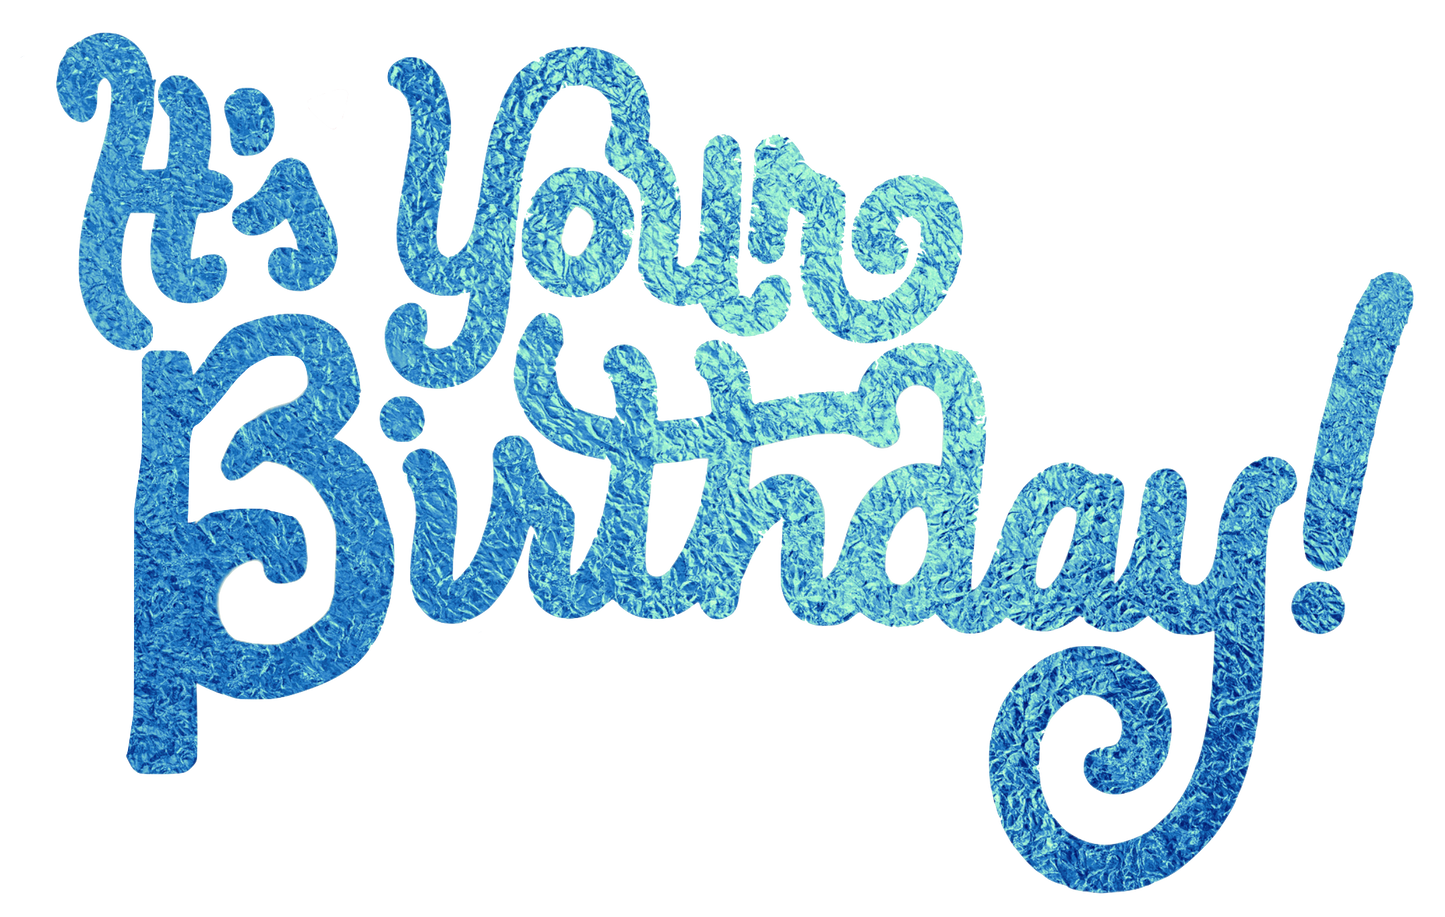 It's Your Birthday words in Shiny Foil Transparent Background - Blue